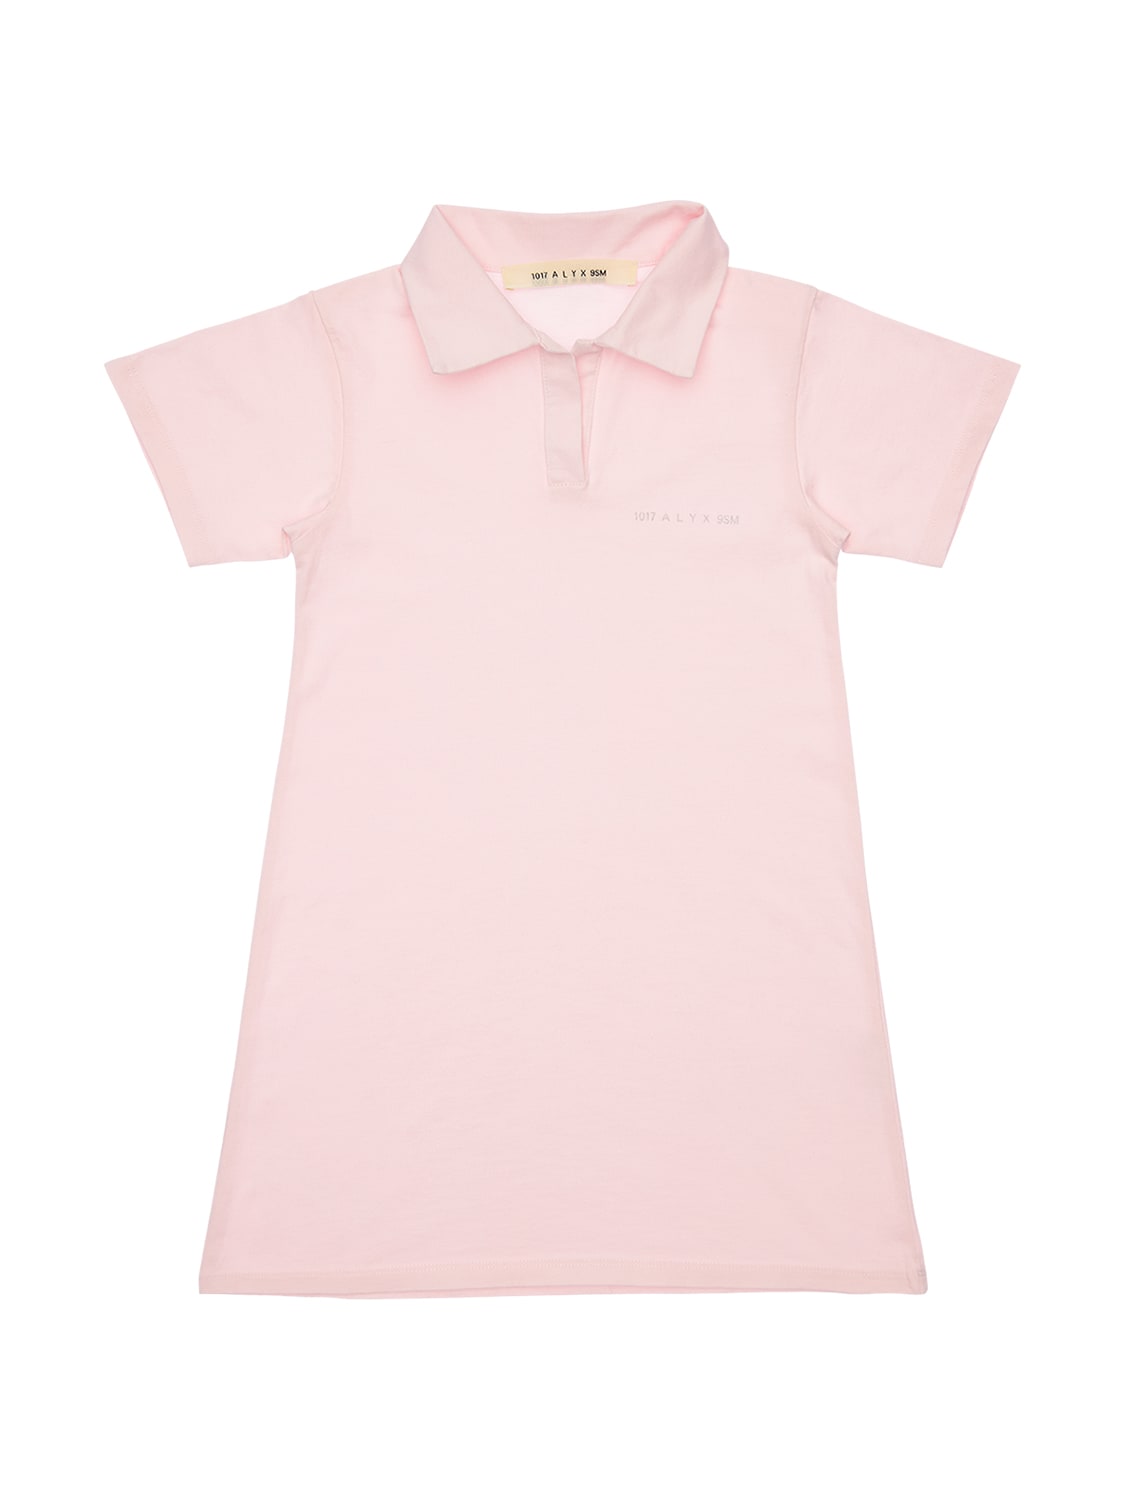 Alyx Kids' Cotton Jersey Polo Dress In Pink